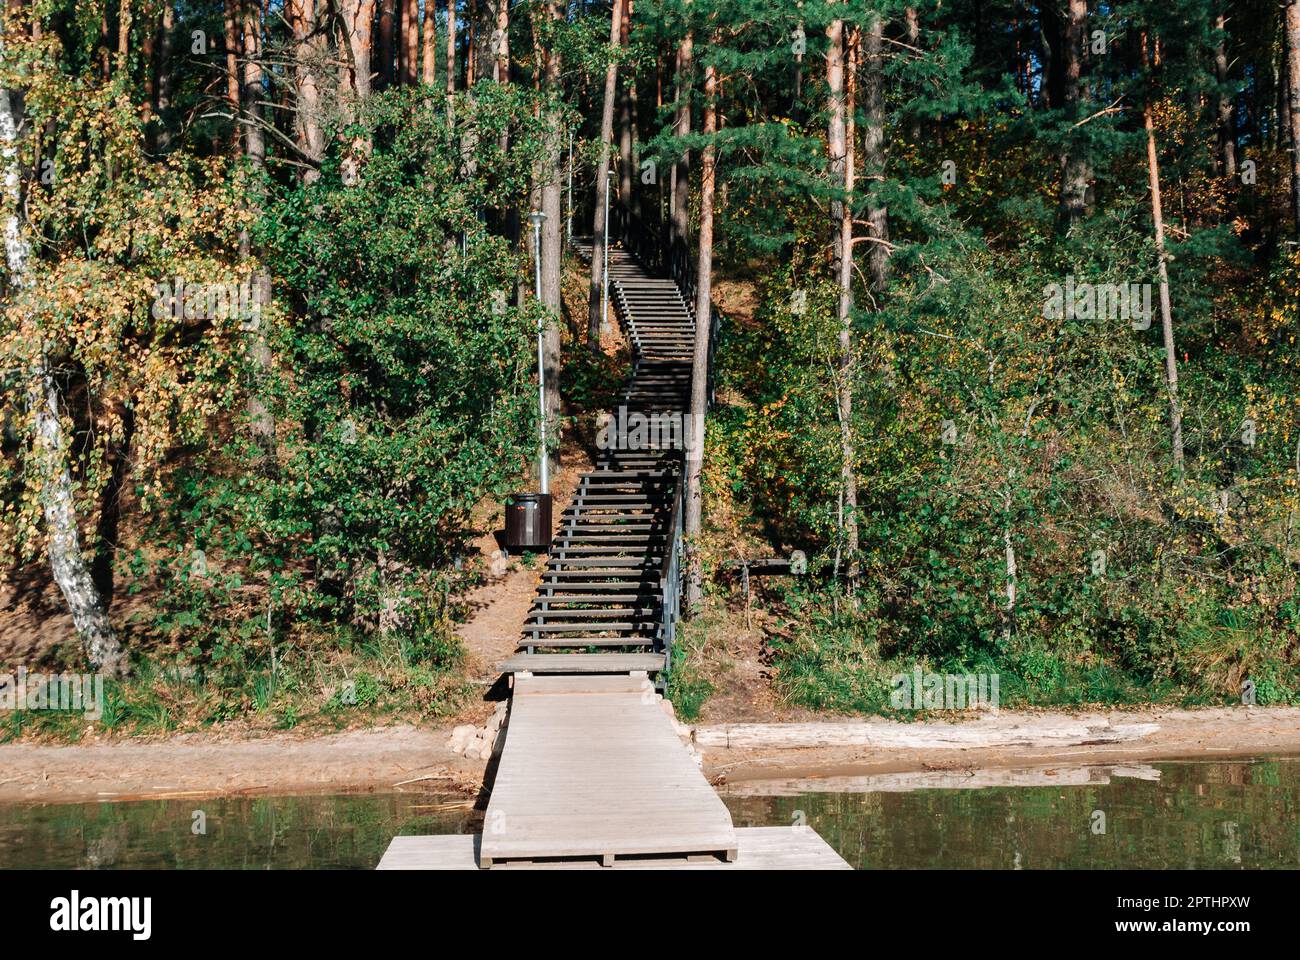 Wooden staircase descending to a wooden pier on Lake Baltieji Lakajai in Labanoras Regional Park, Lithuania. Stock Photo